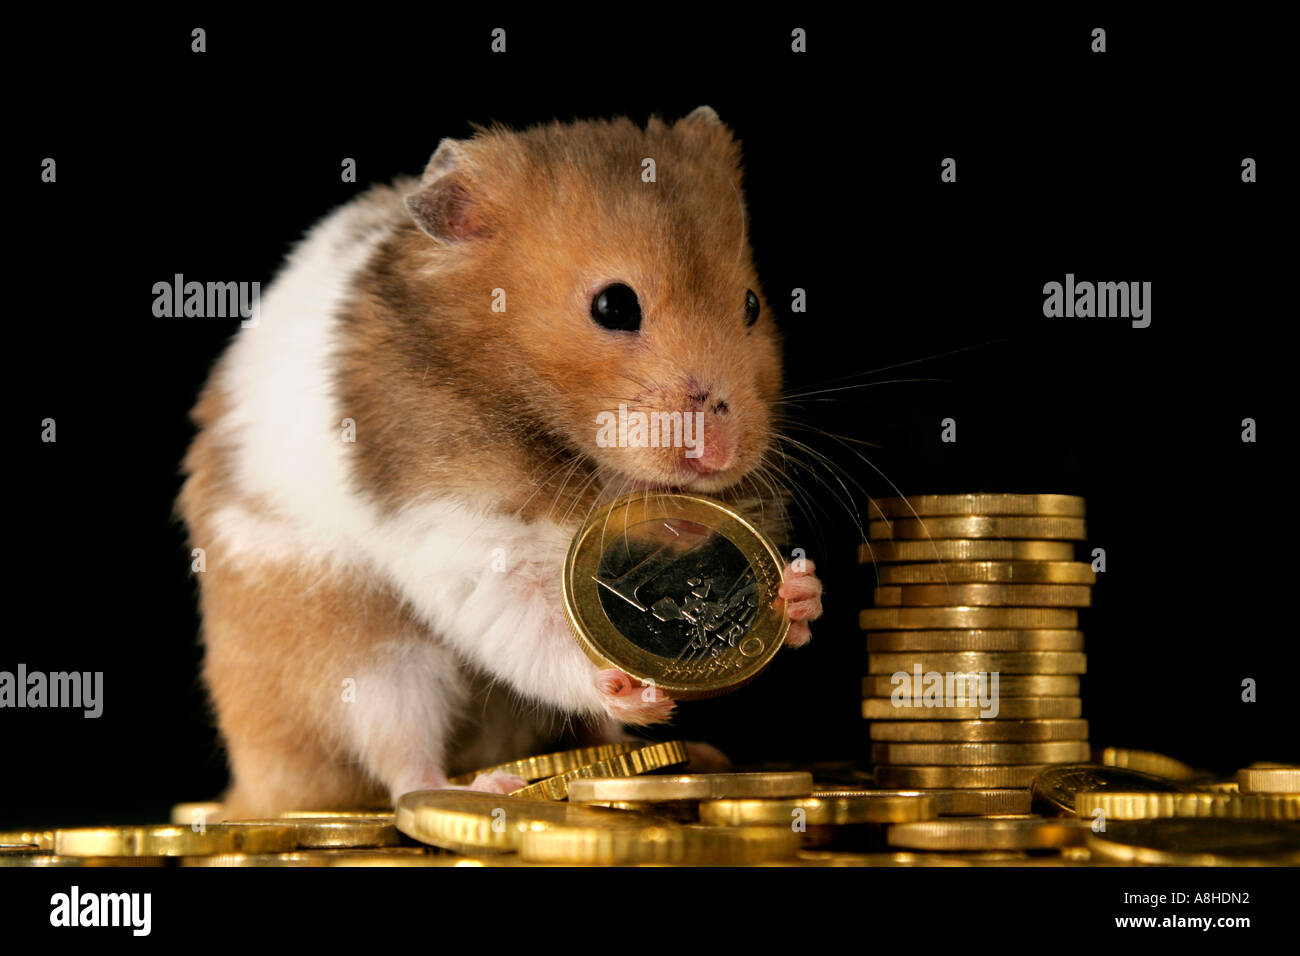 Golden hamster with euros Stock Photo